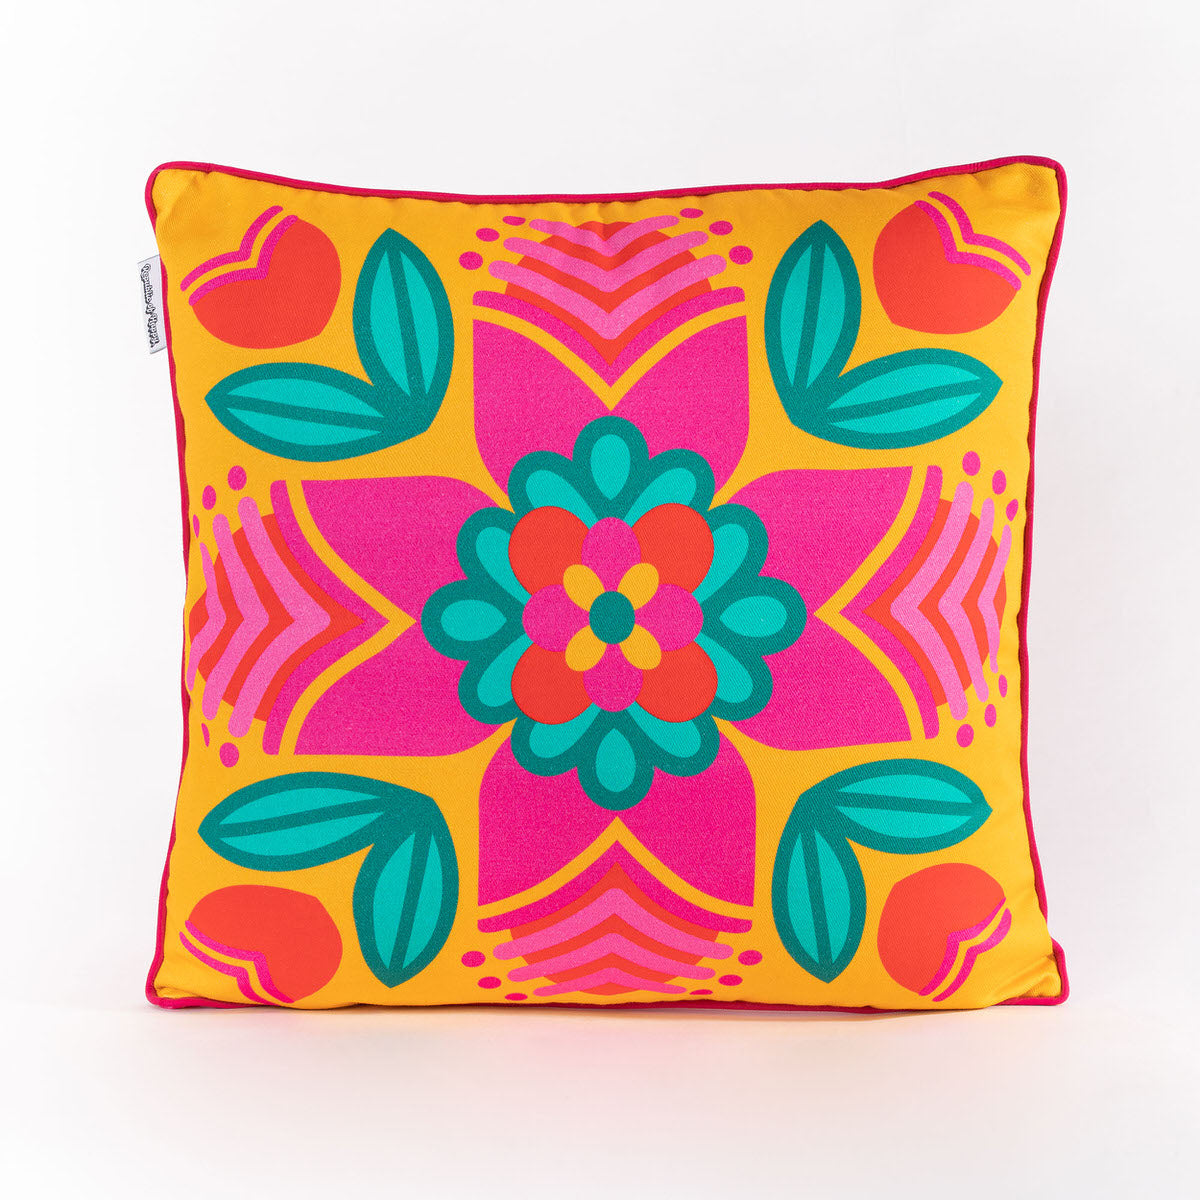 YELLOW FLORAL MANDALA - Bright and colourful double-sided cushion cover